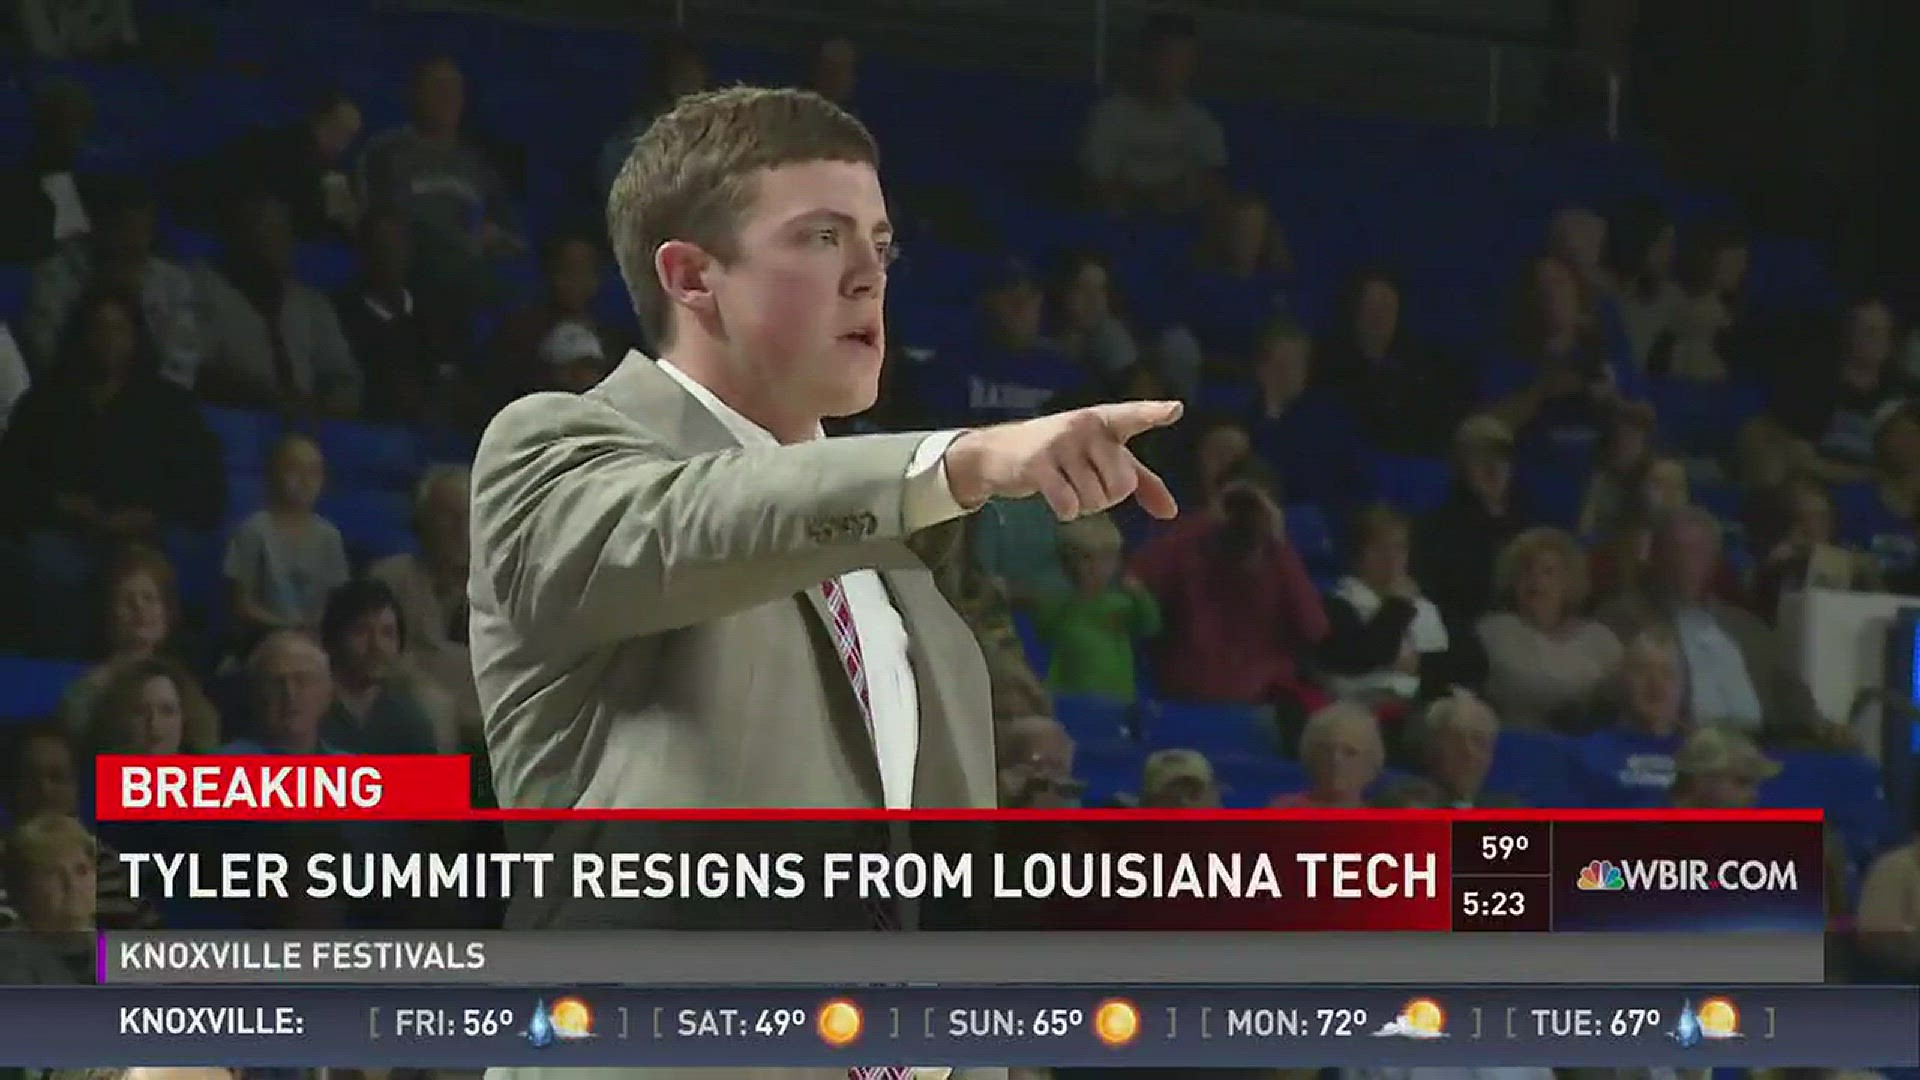 In his resignation, Tyler Summitt apologized for a relationship he was involved in that hurt the people he loves and respects most. (4/7/16 5PM)